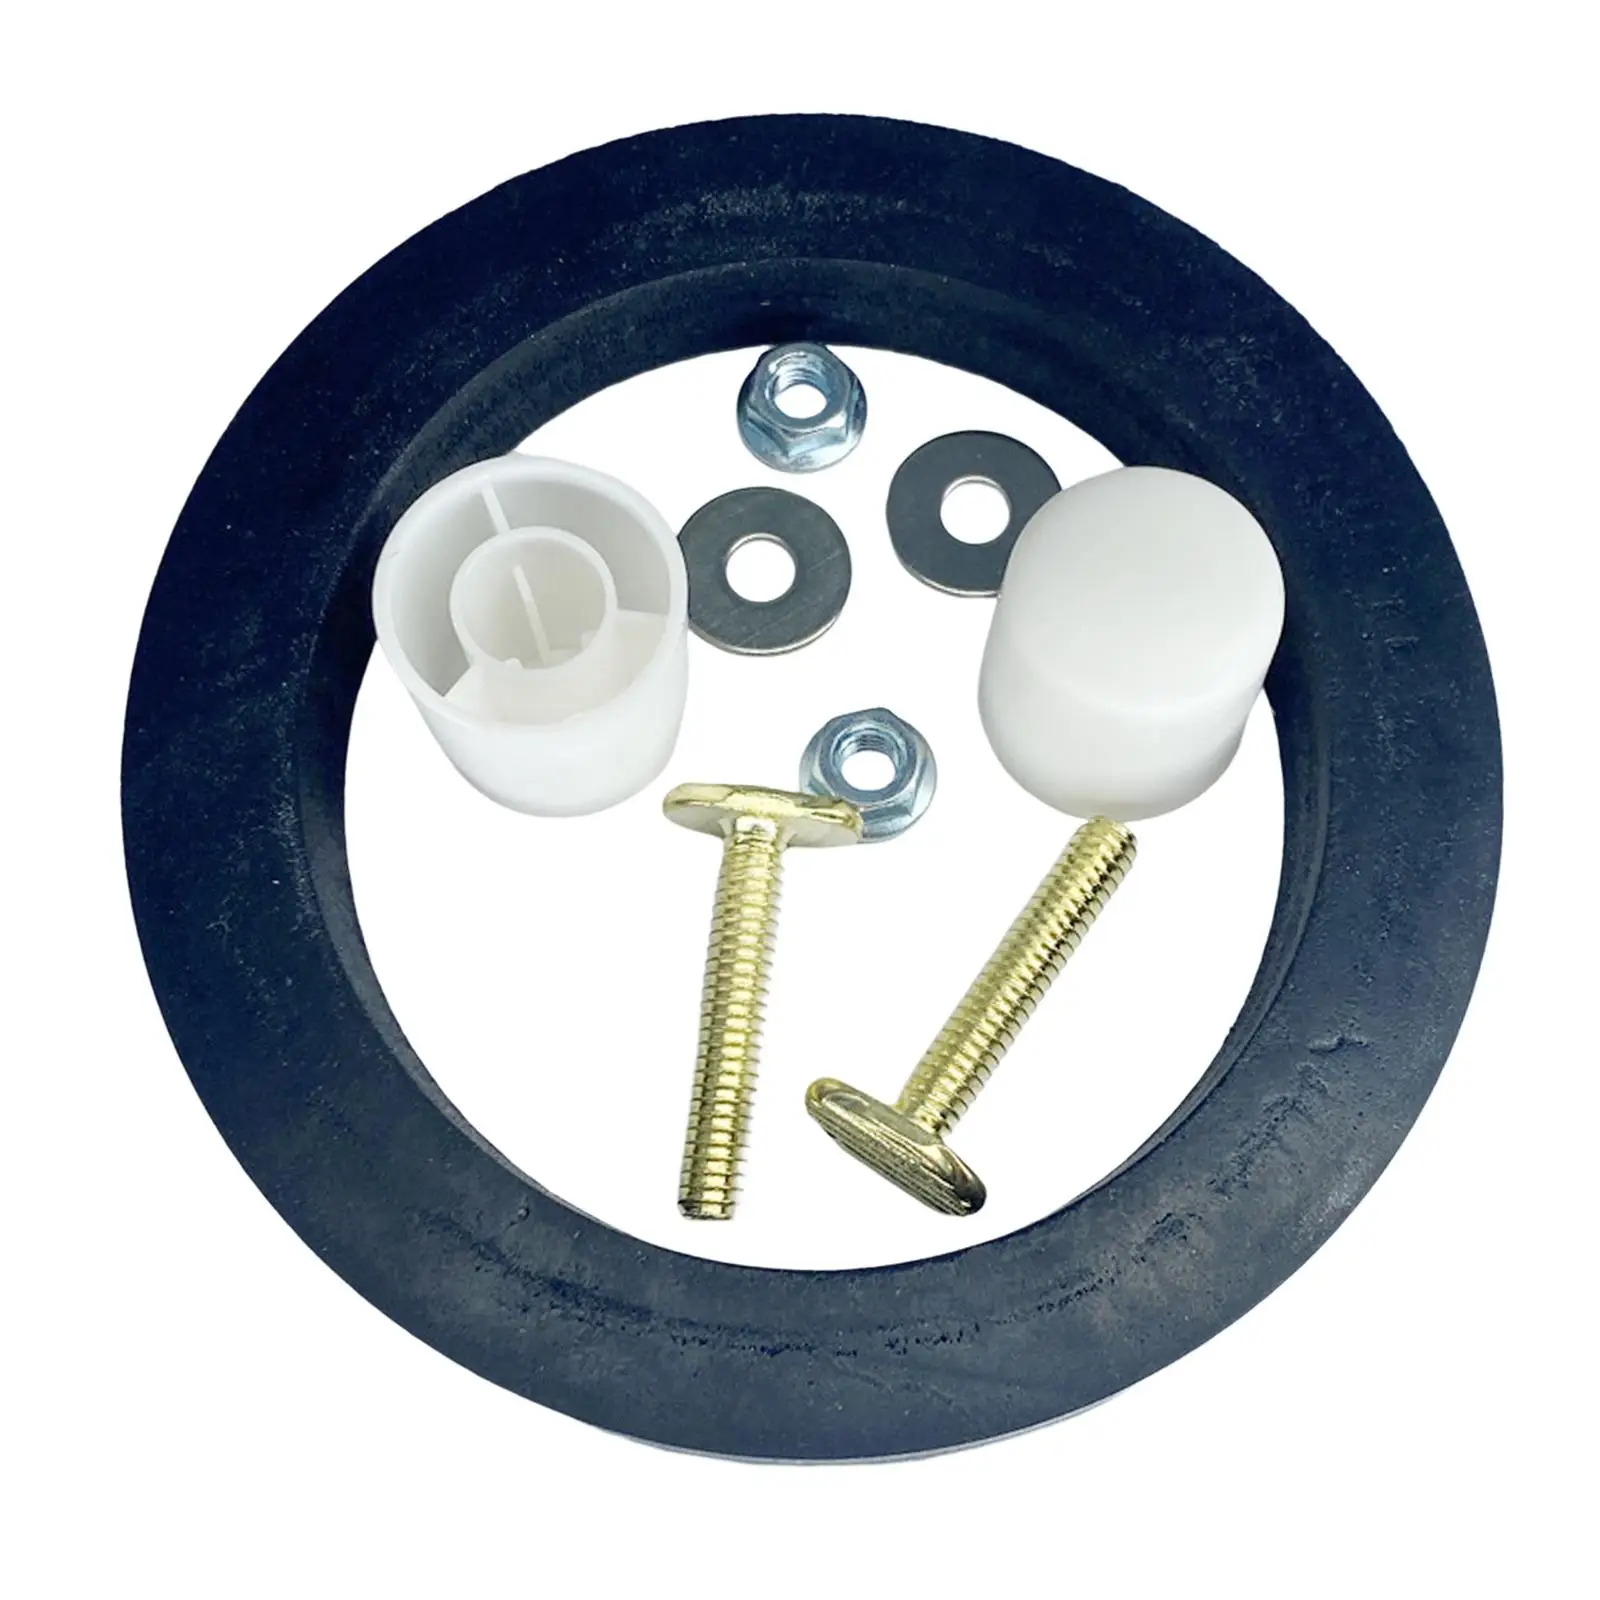 Seal Gasket of RV Toilet for 300, 310, 320 Series with Brass Bolts, Nuts and